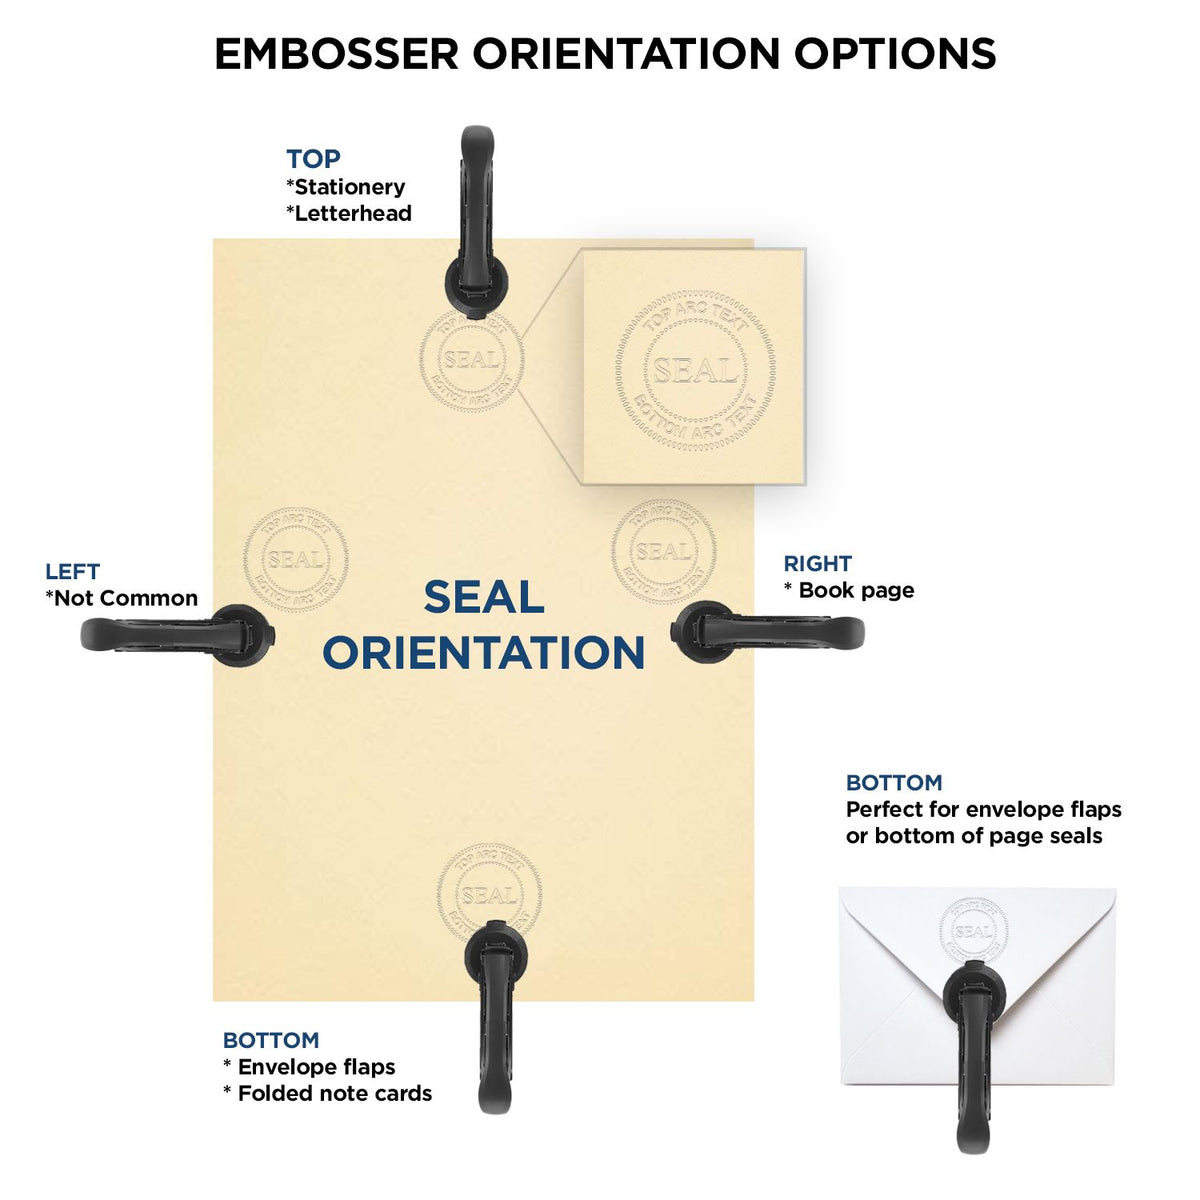 An infographic for the Long Reach California PE Seal showing embosser orientation, this is showing examples of a top, bottom, right and left insert.